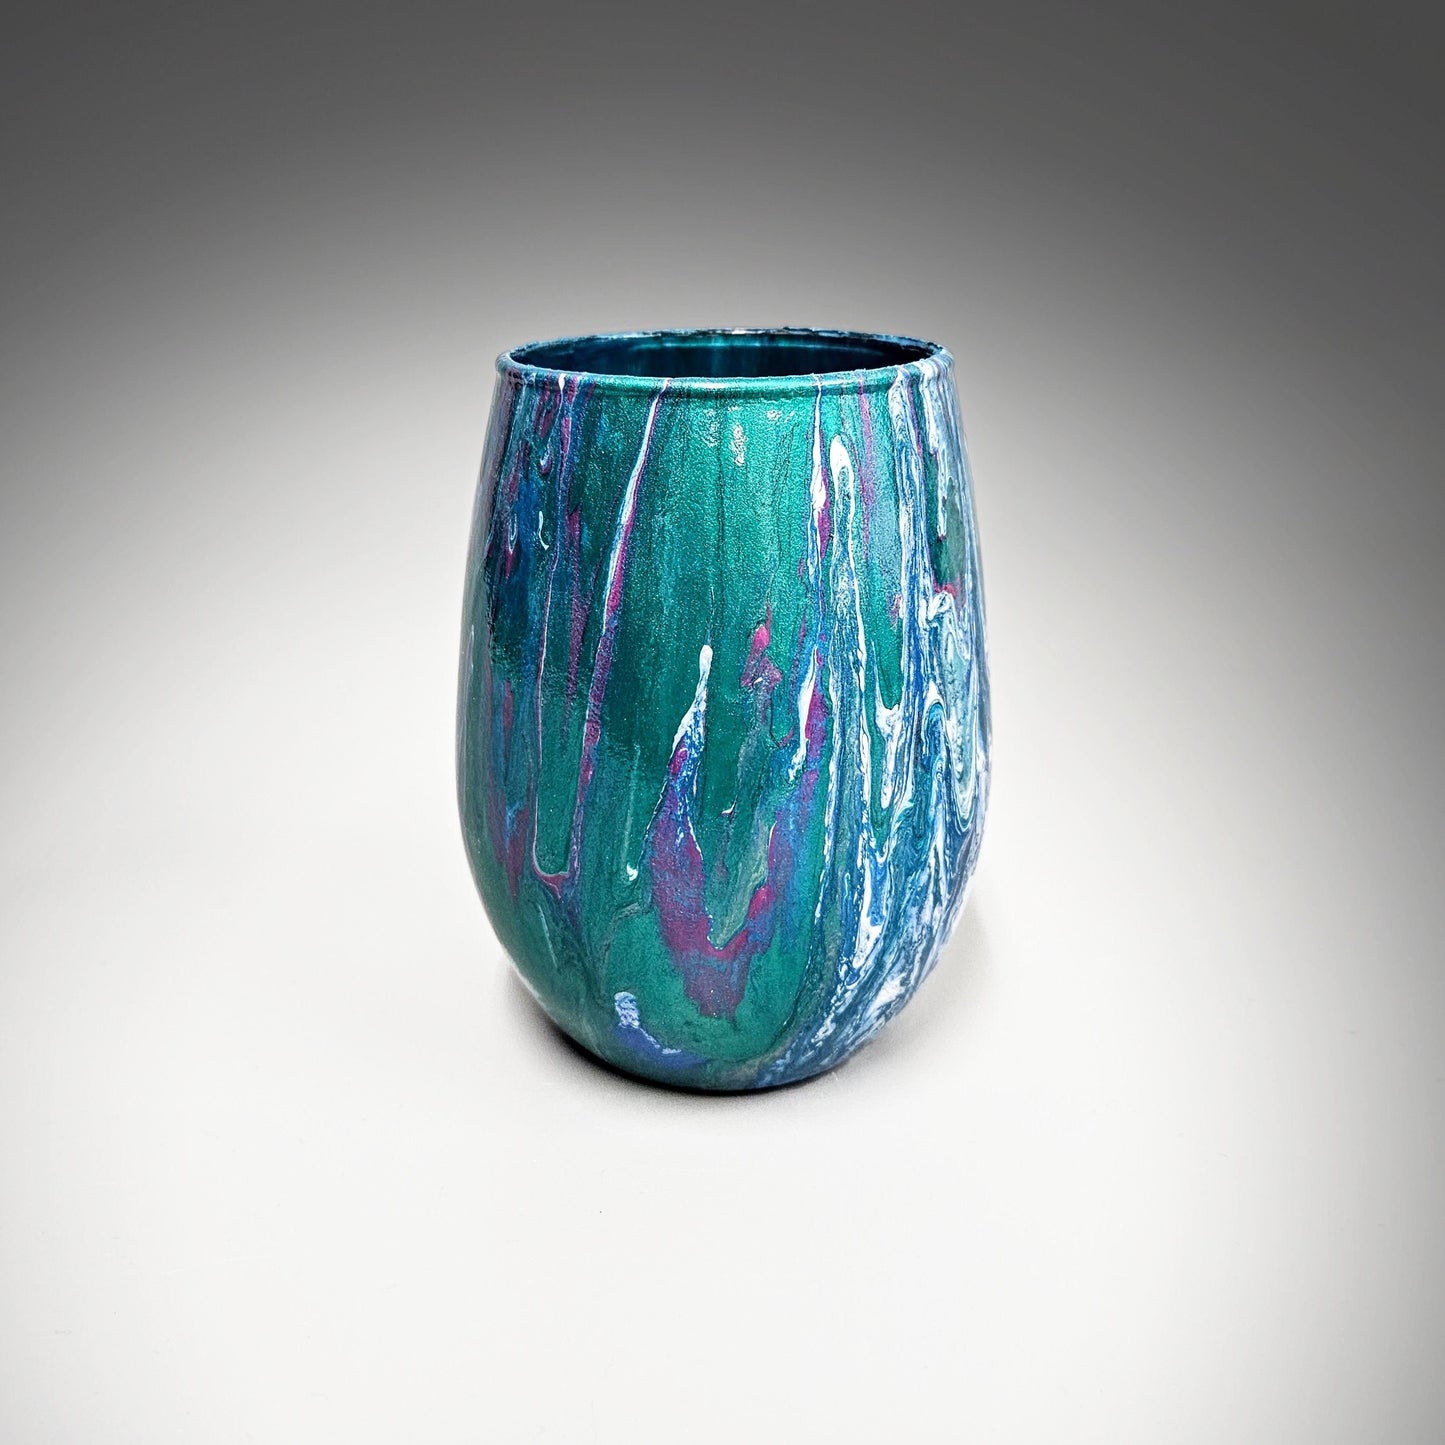 Glass Art Painted Vase in Teal Blue Green Fuchsia and White